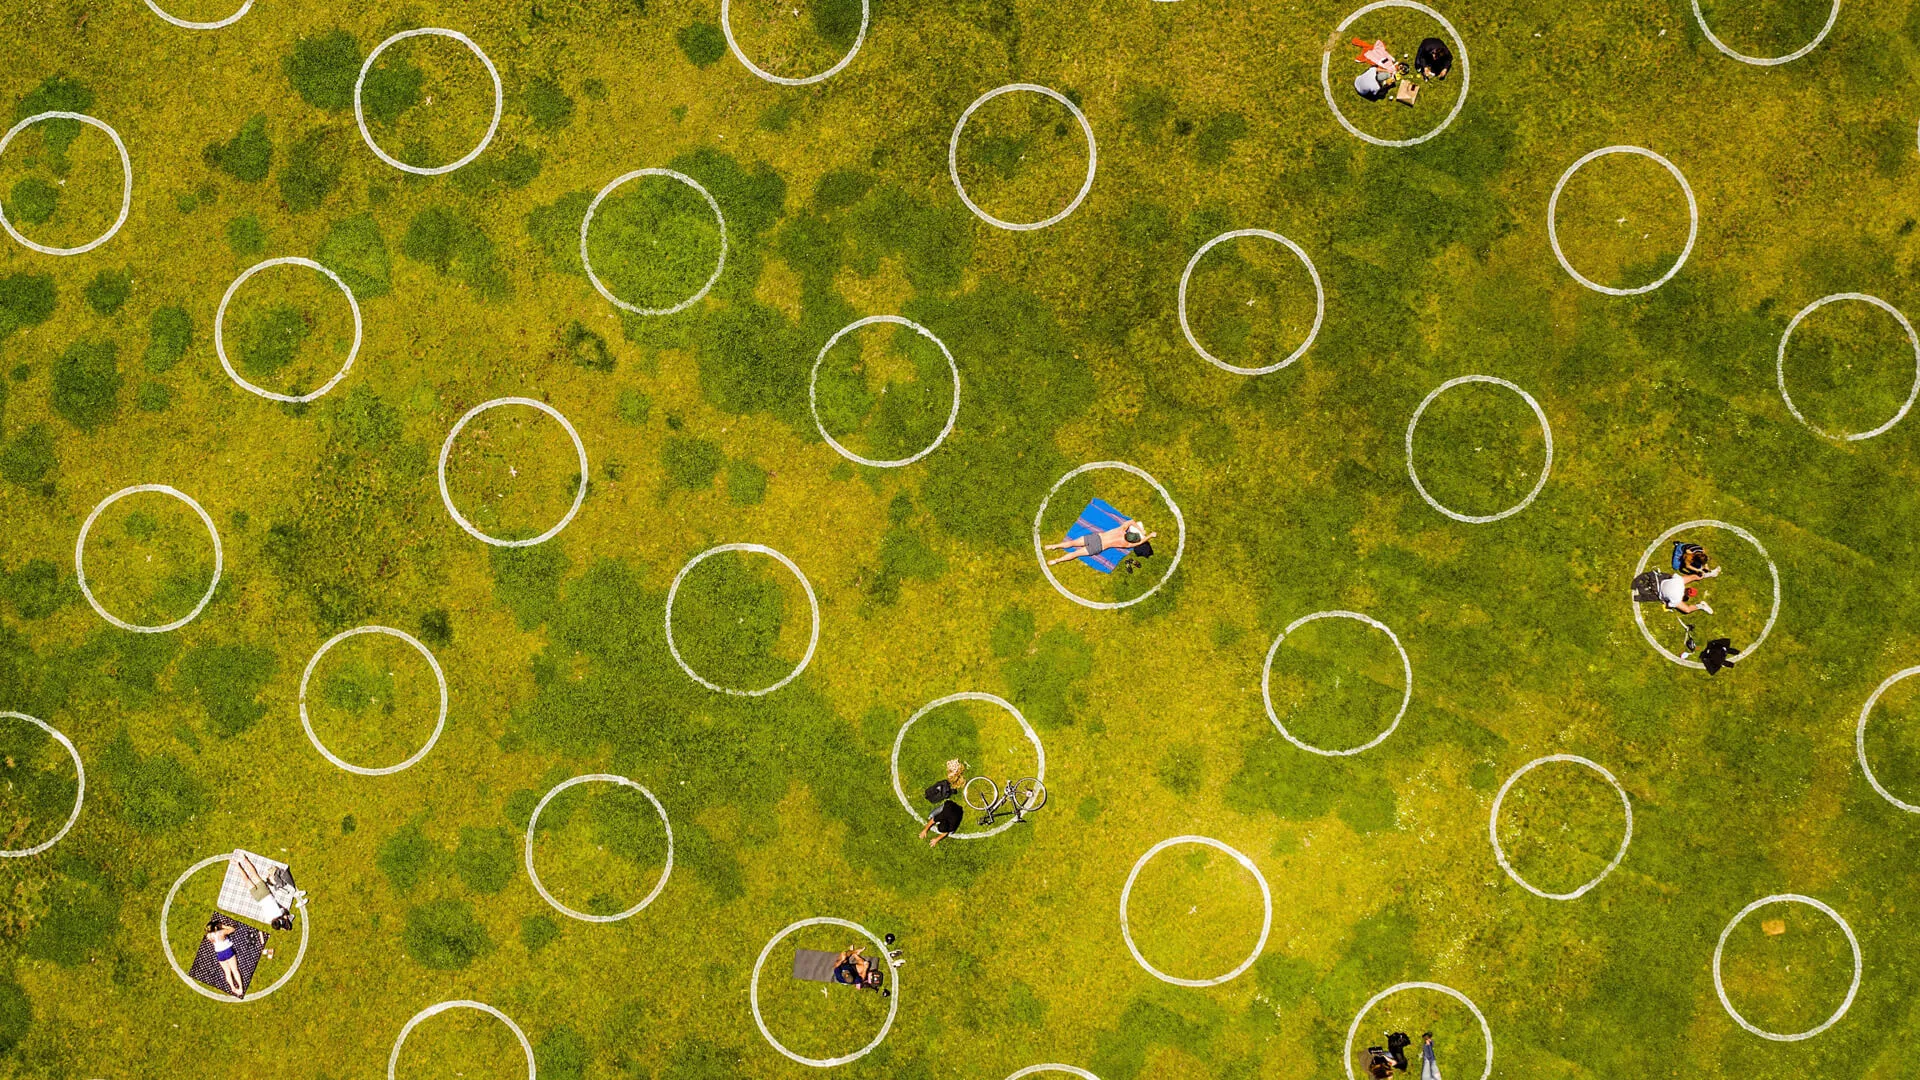 Mandatory Credit: Photo by Noah Berger/AP/Shutterstock (10654910c)Circles designed to help prevent the spread of the coronavirus by encouraging social distancing line San Francisco's Dolores ParkVirus Outbreak California Daily Life, San Francisco, United States - 21 May 2020.